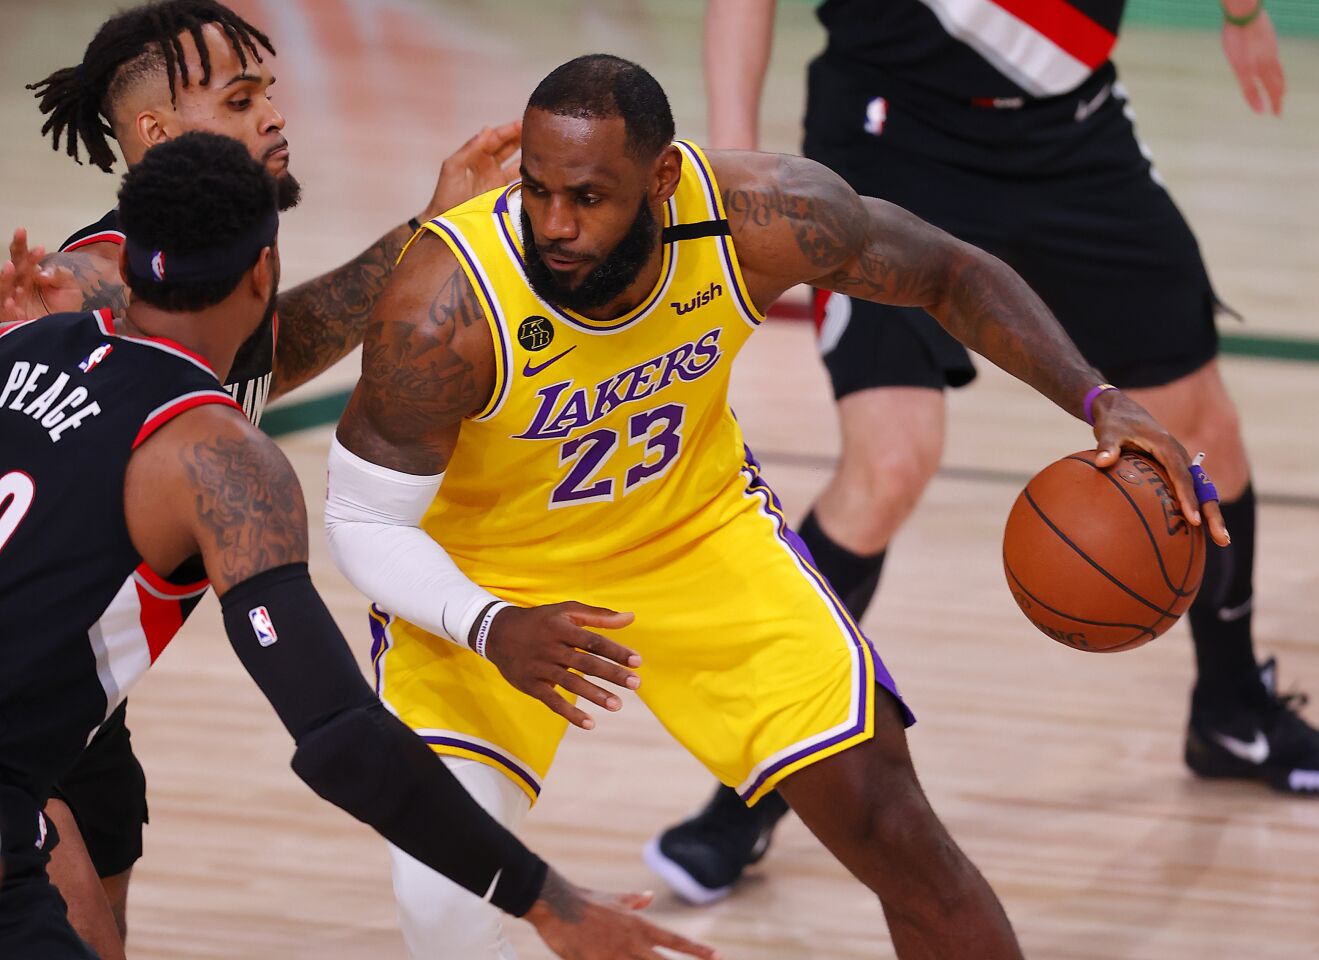 Lakers forward LeBron James drives to the basket against the Portland Trail Blazers in the first half.